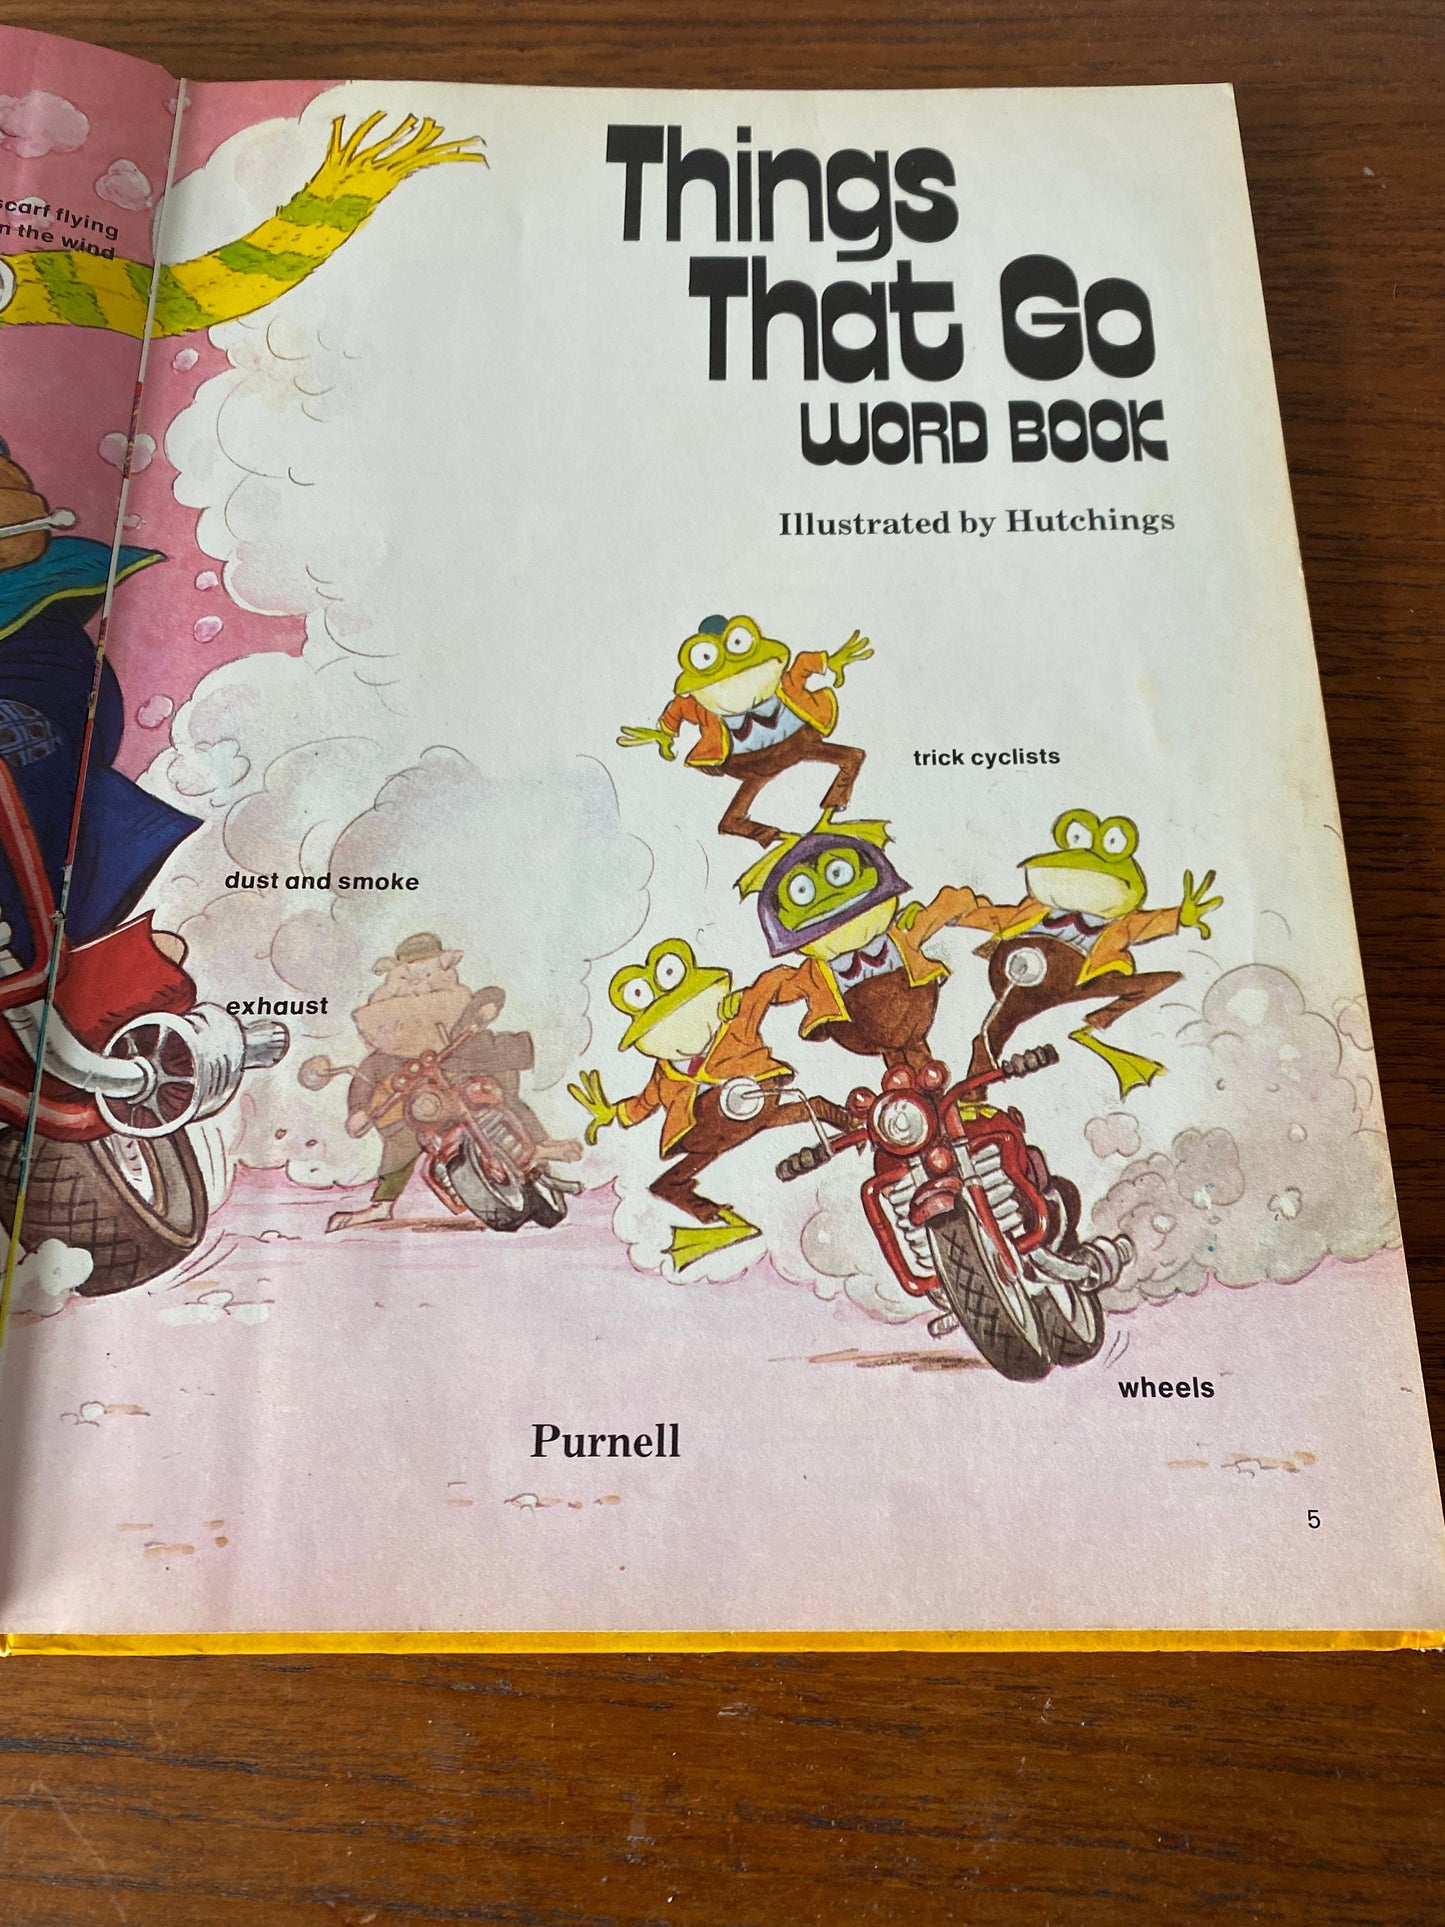 Things that Go Word Book. 70s hardback picture book.. Great gift idea